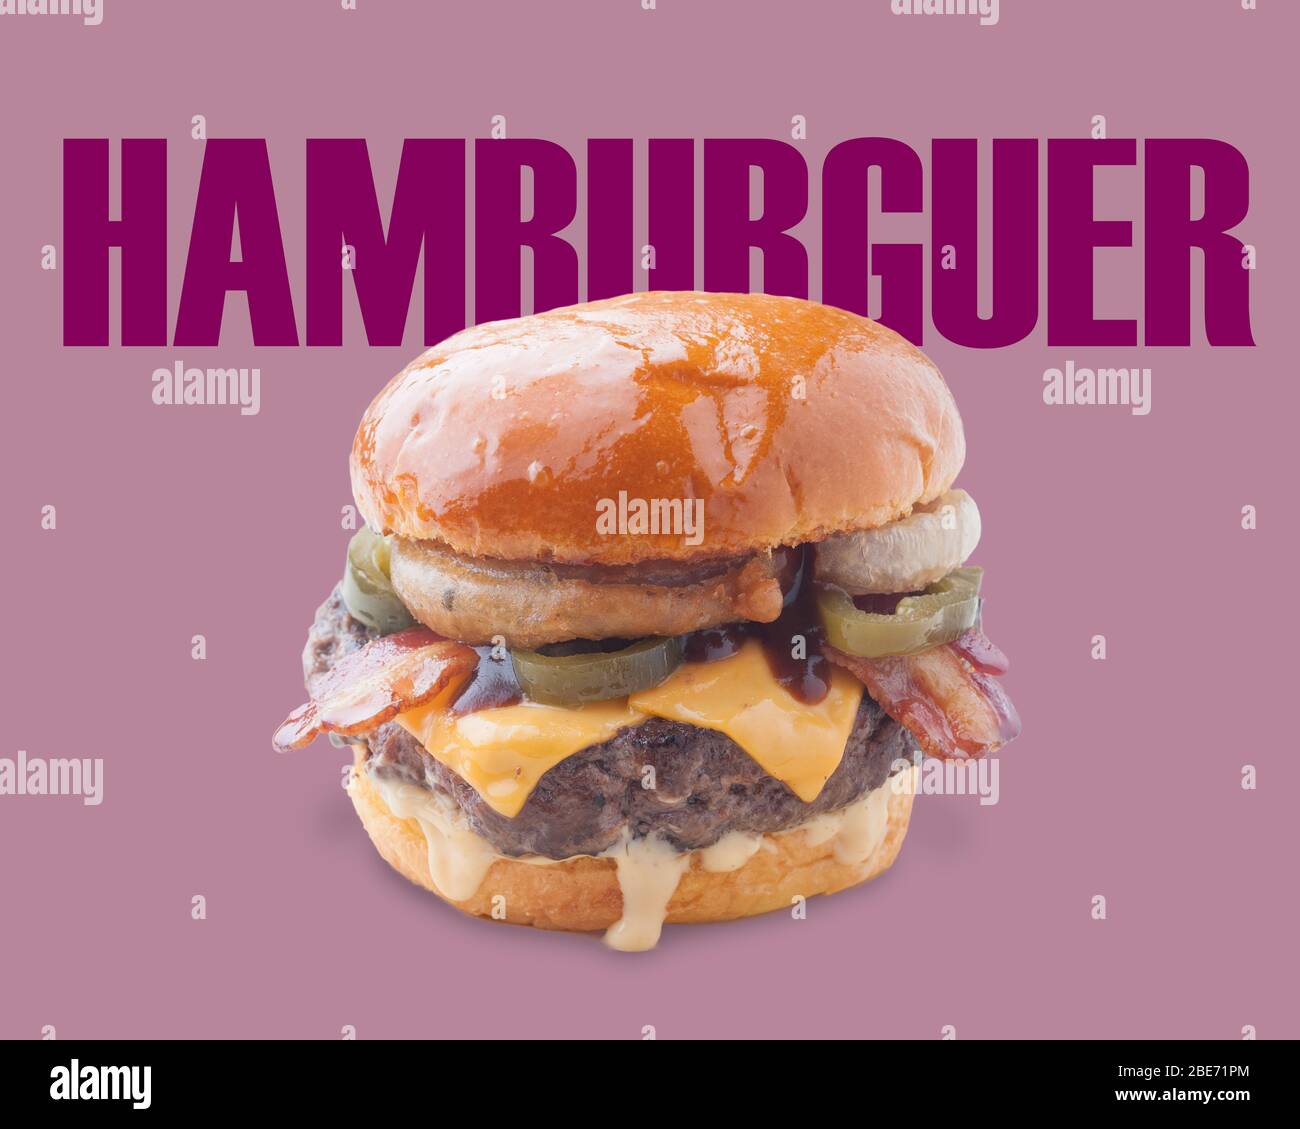 hamburger applied to notice design or promotional sign Stock Photo